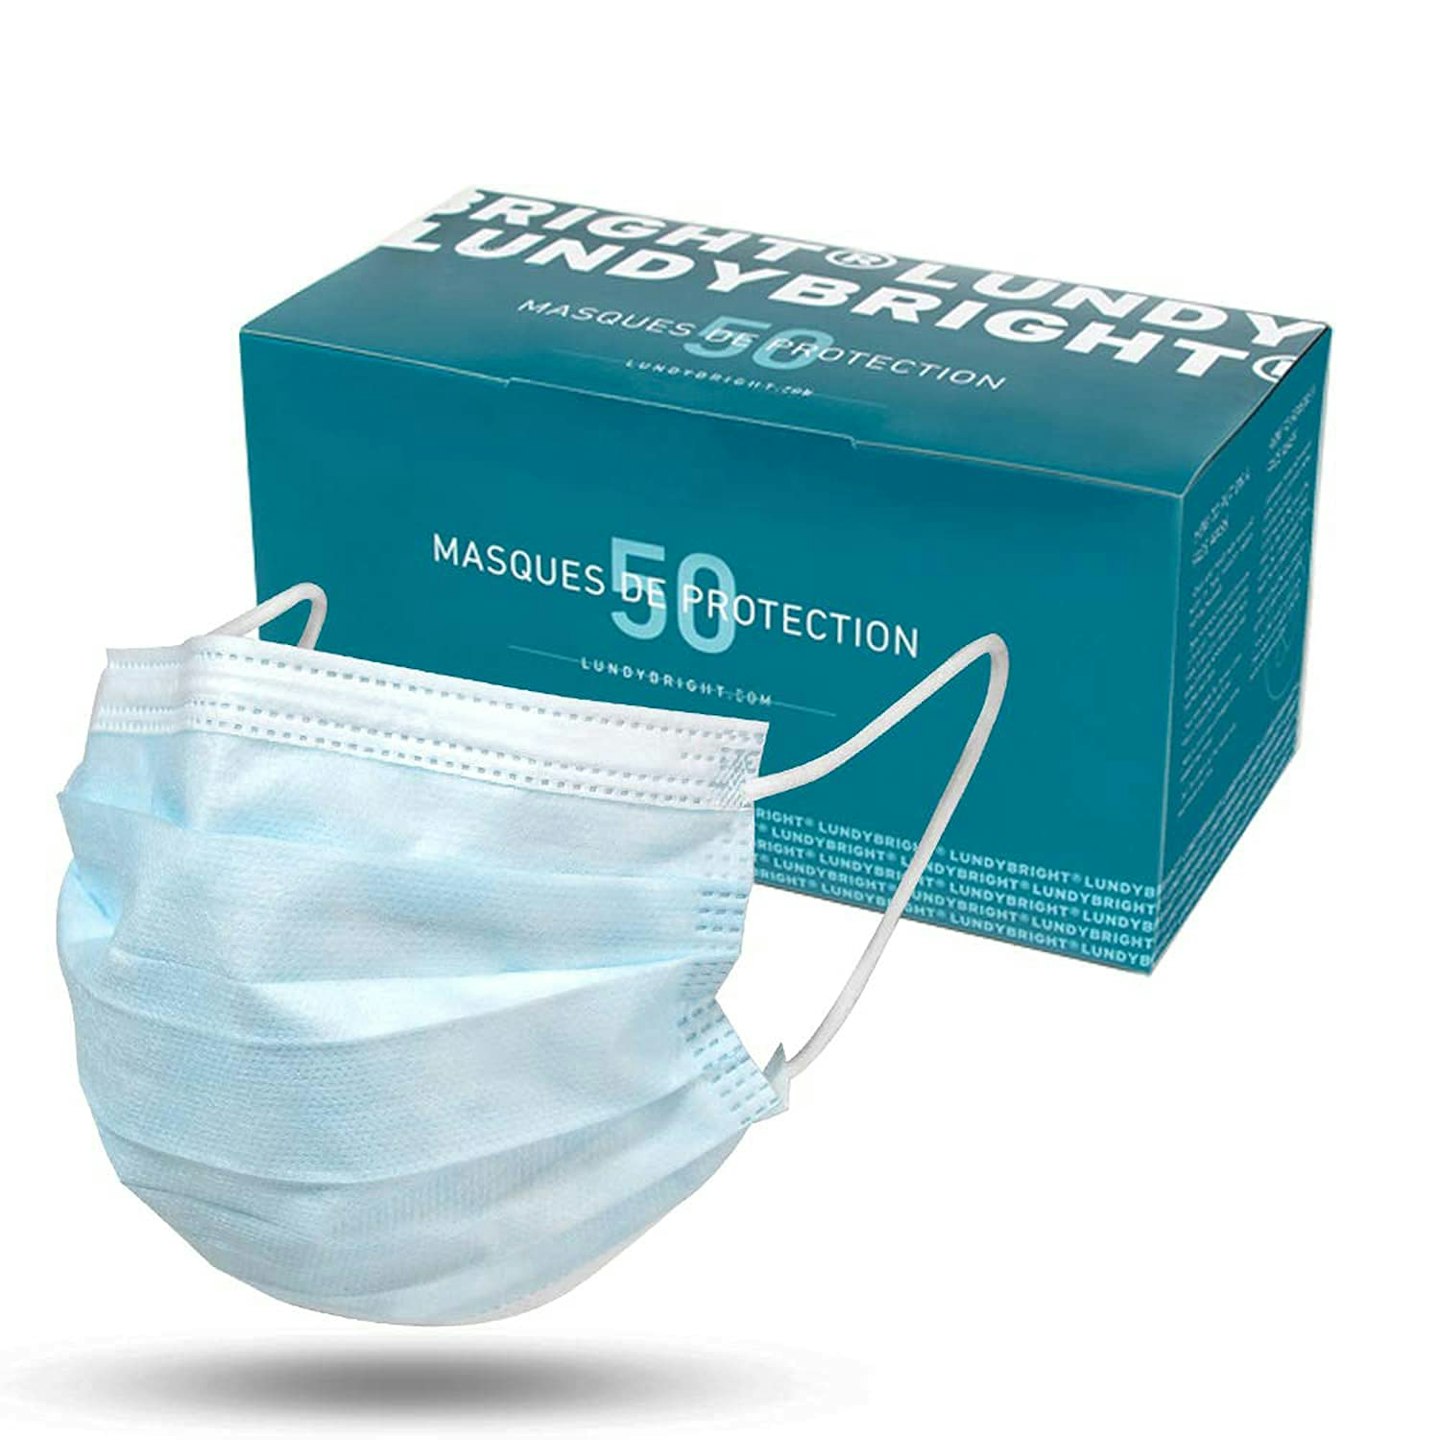 Lundybright CE Certified Medical Mask, 3 Layer Type 1, White and Blue, 50 masks for £10.53